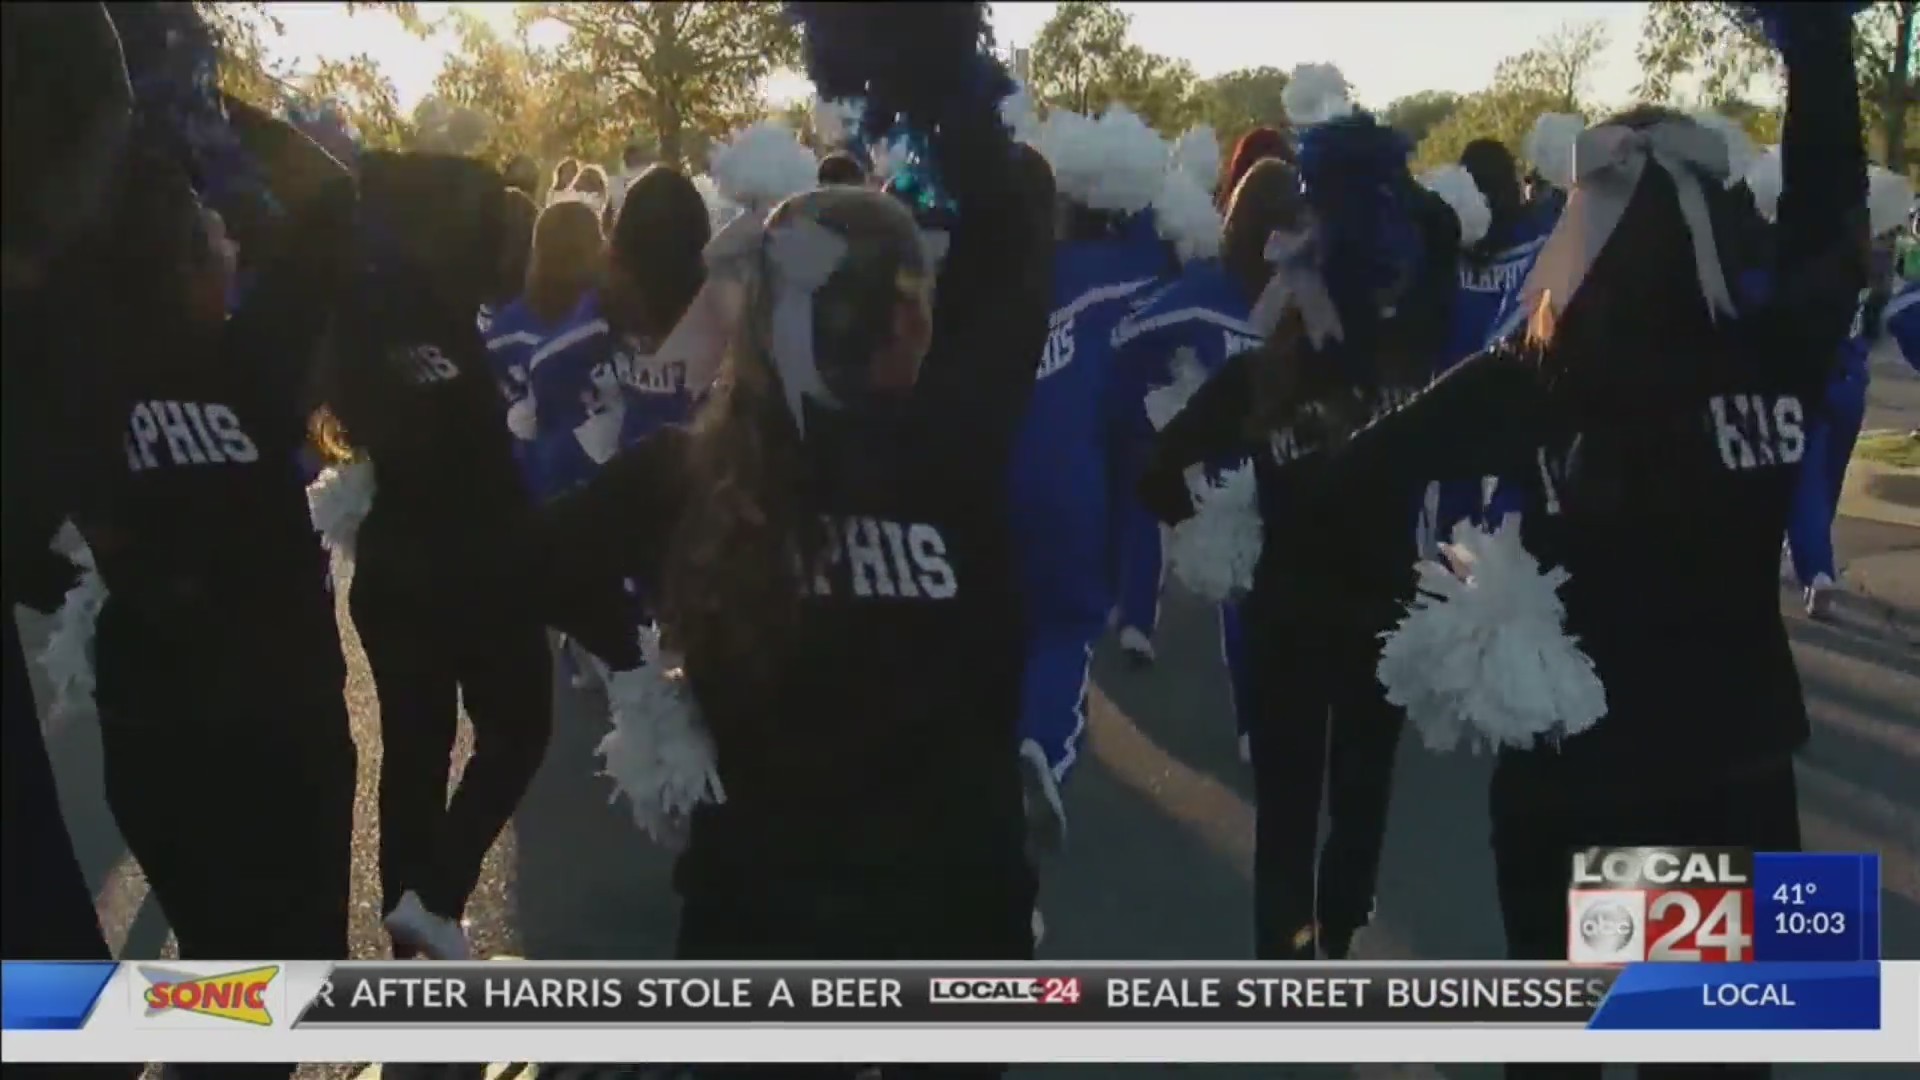 Memphis Tiger fans celebrate Homecoming ahead of nationally televised game